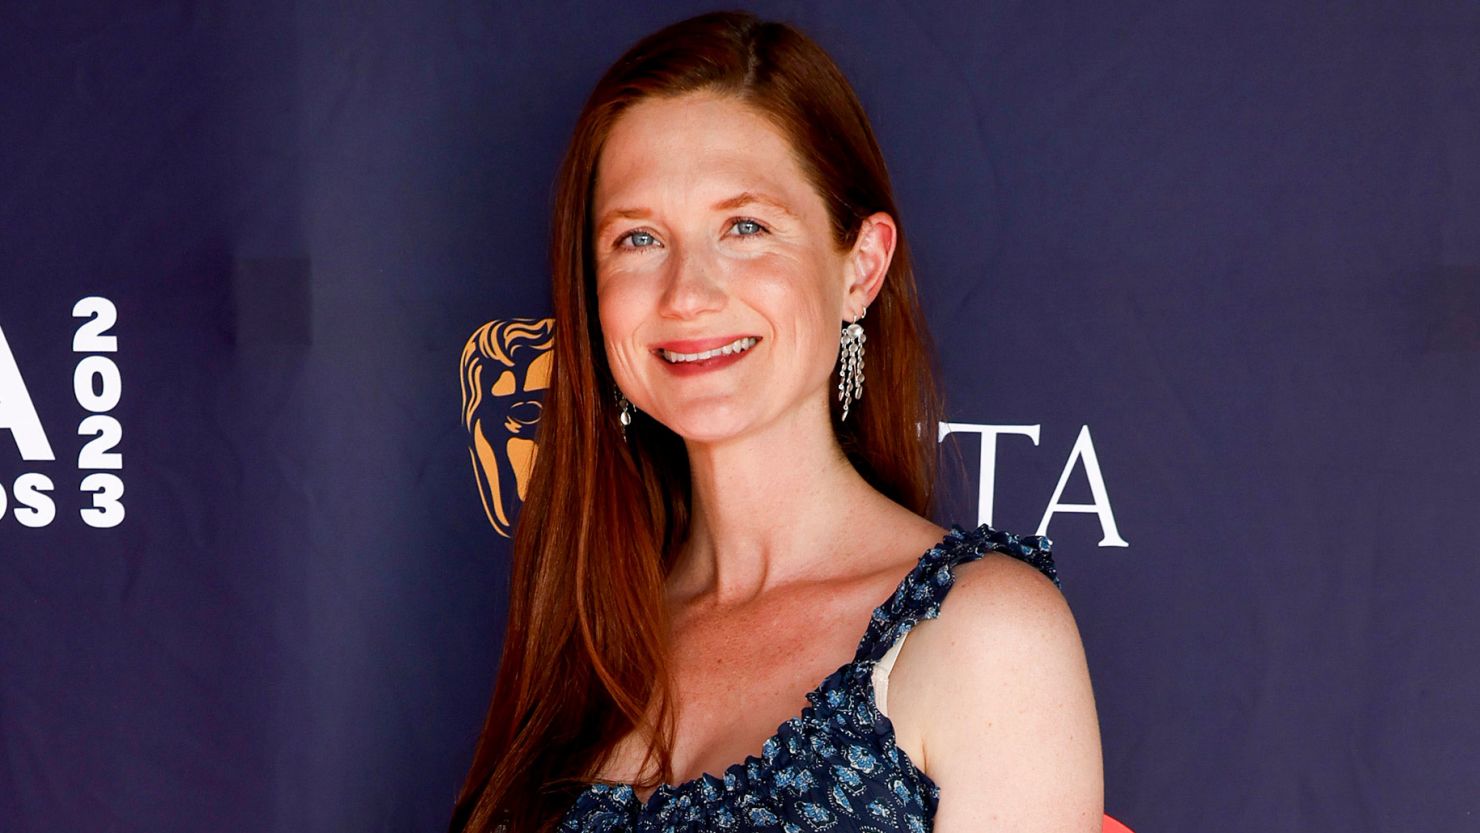 Actress Bonnie Wright, who starred in the "Harry Potter" films, has given birth to a baby boy.